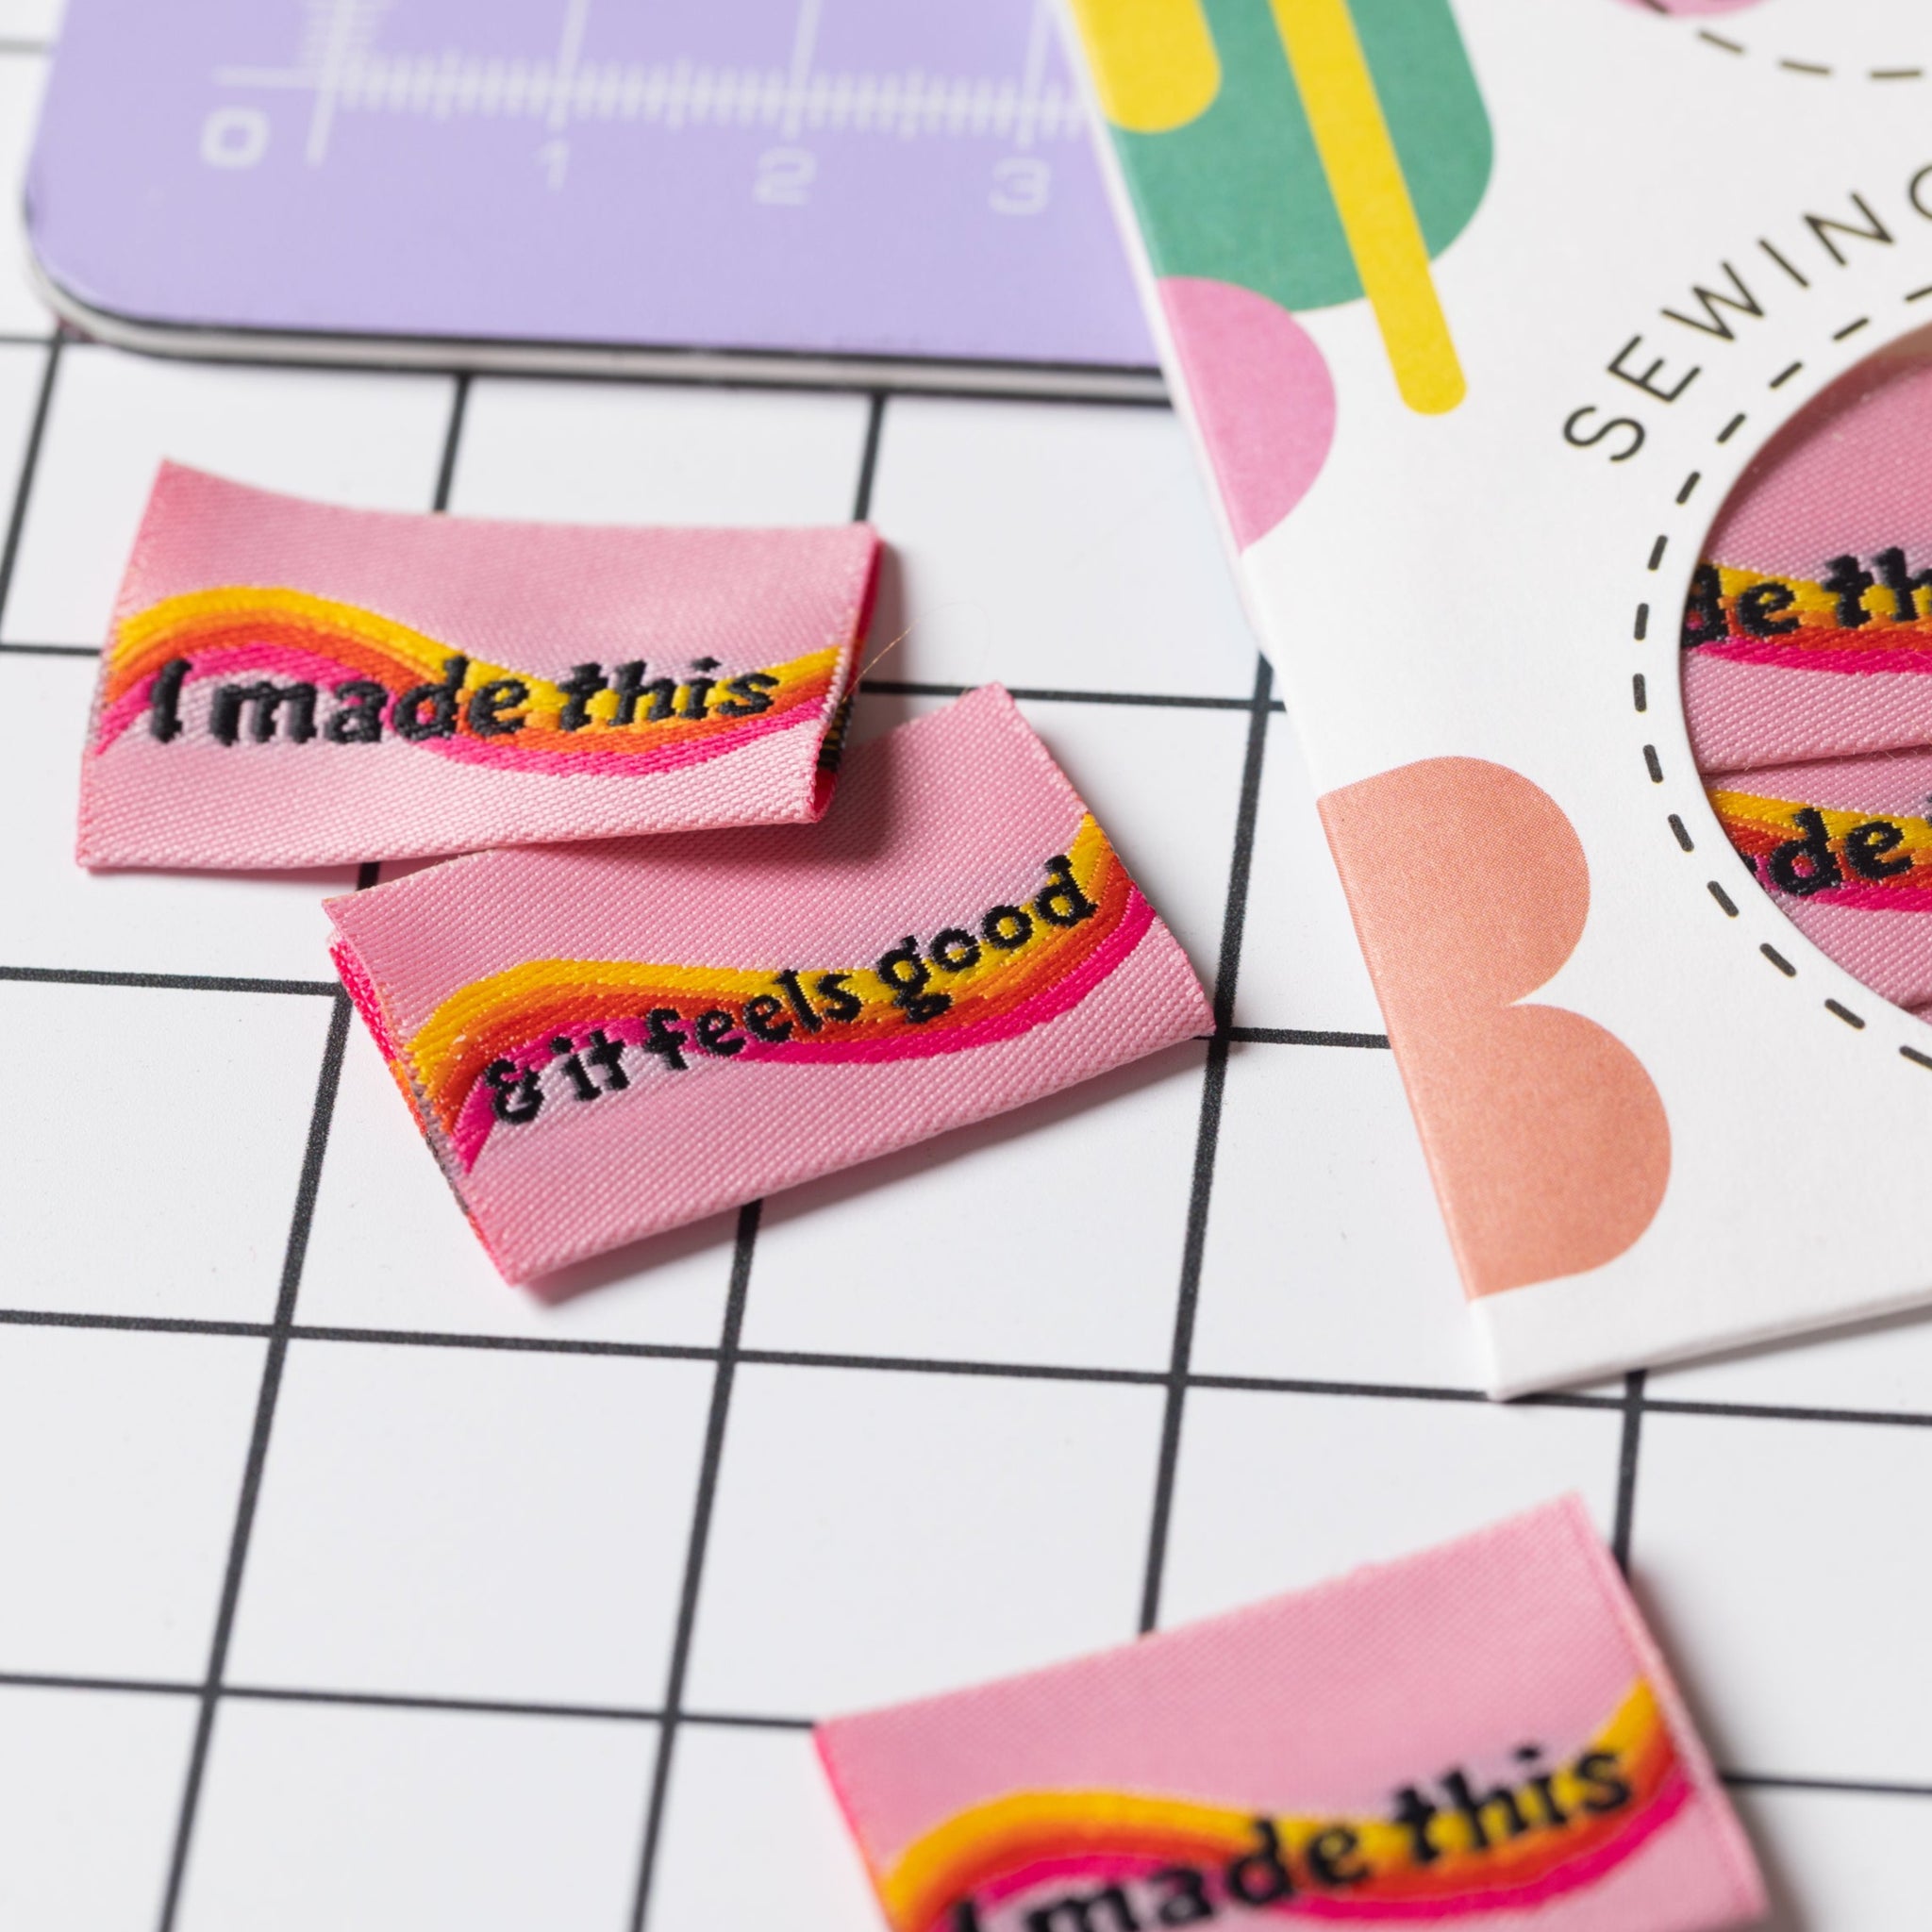 IT FEELS GOOD Pack of 6 woven labels